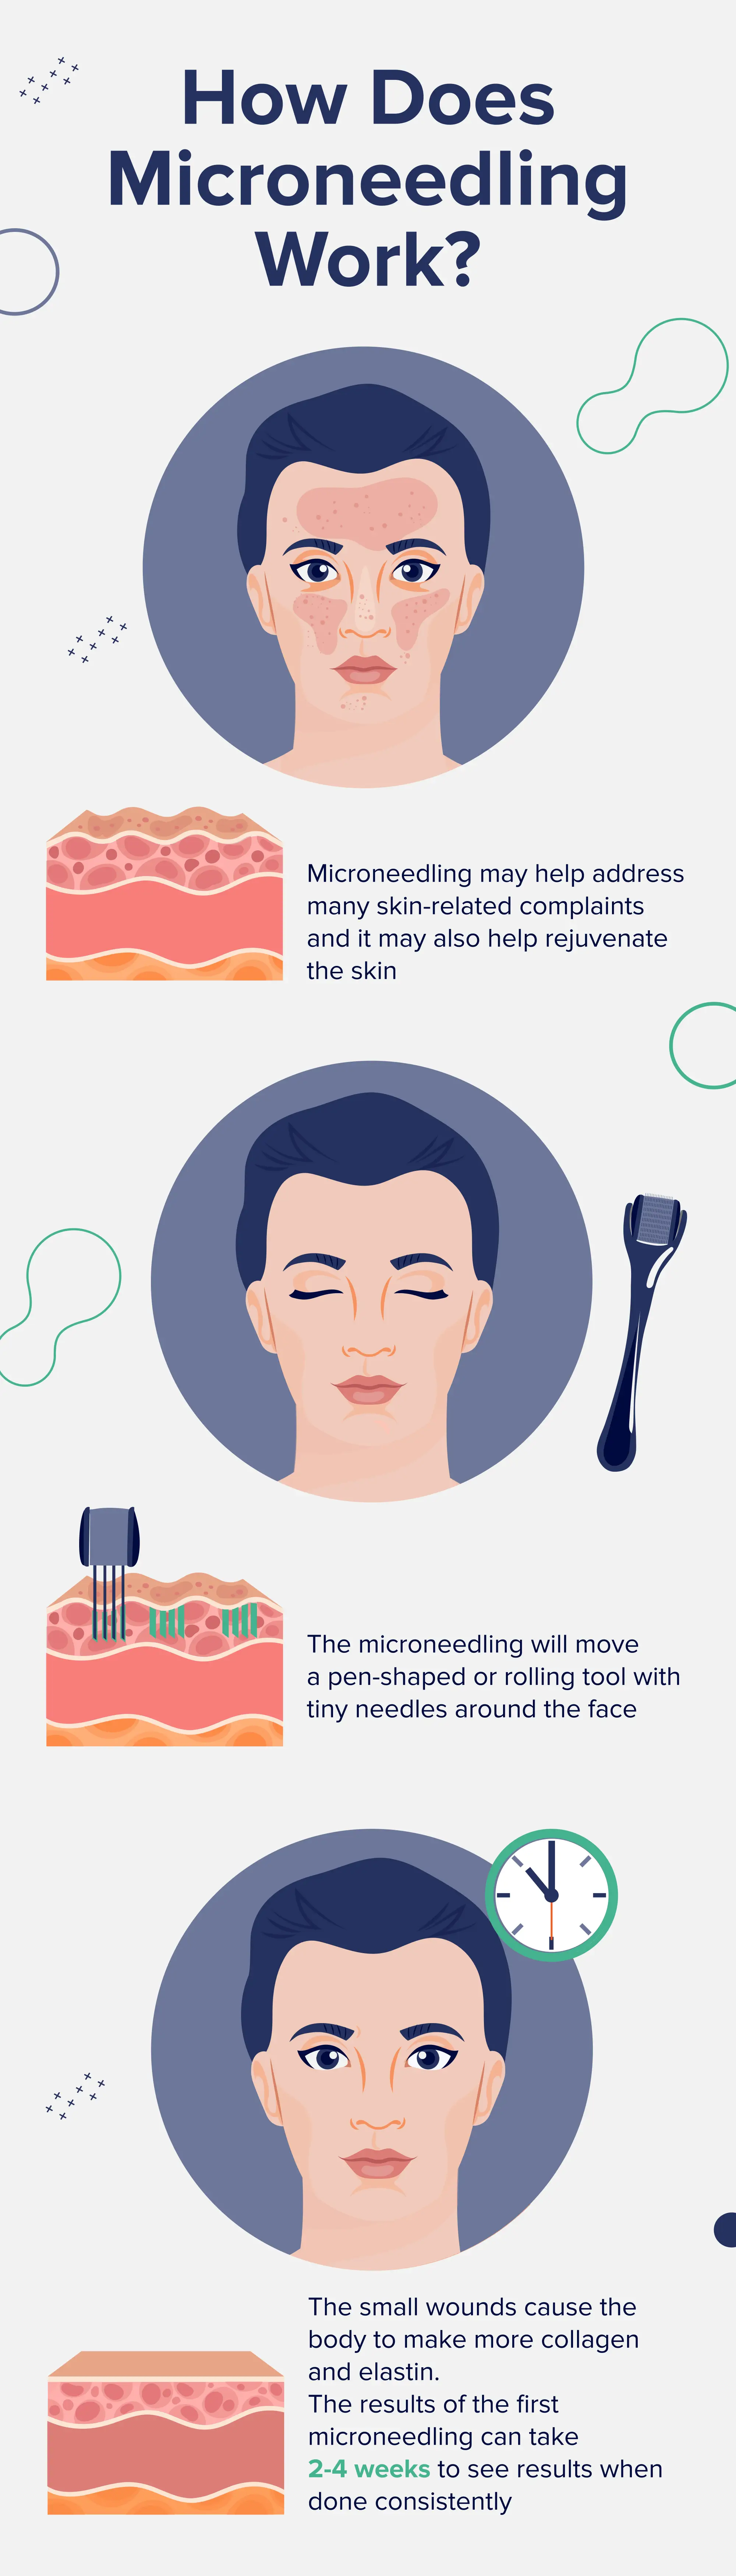 A visual guide to microneedling, showing its skin rejuvenation process.